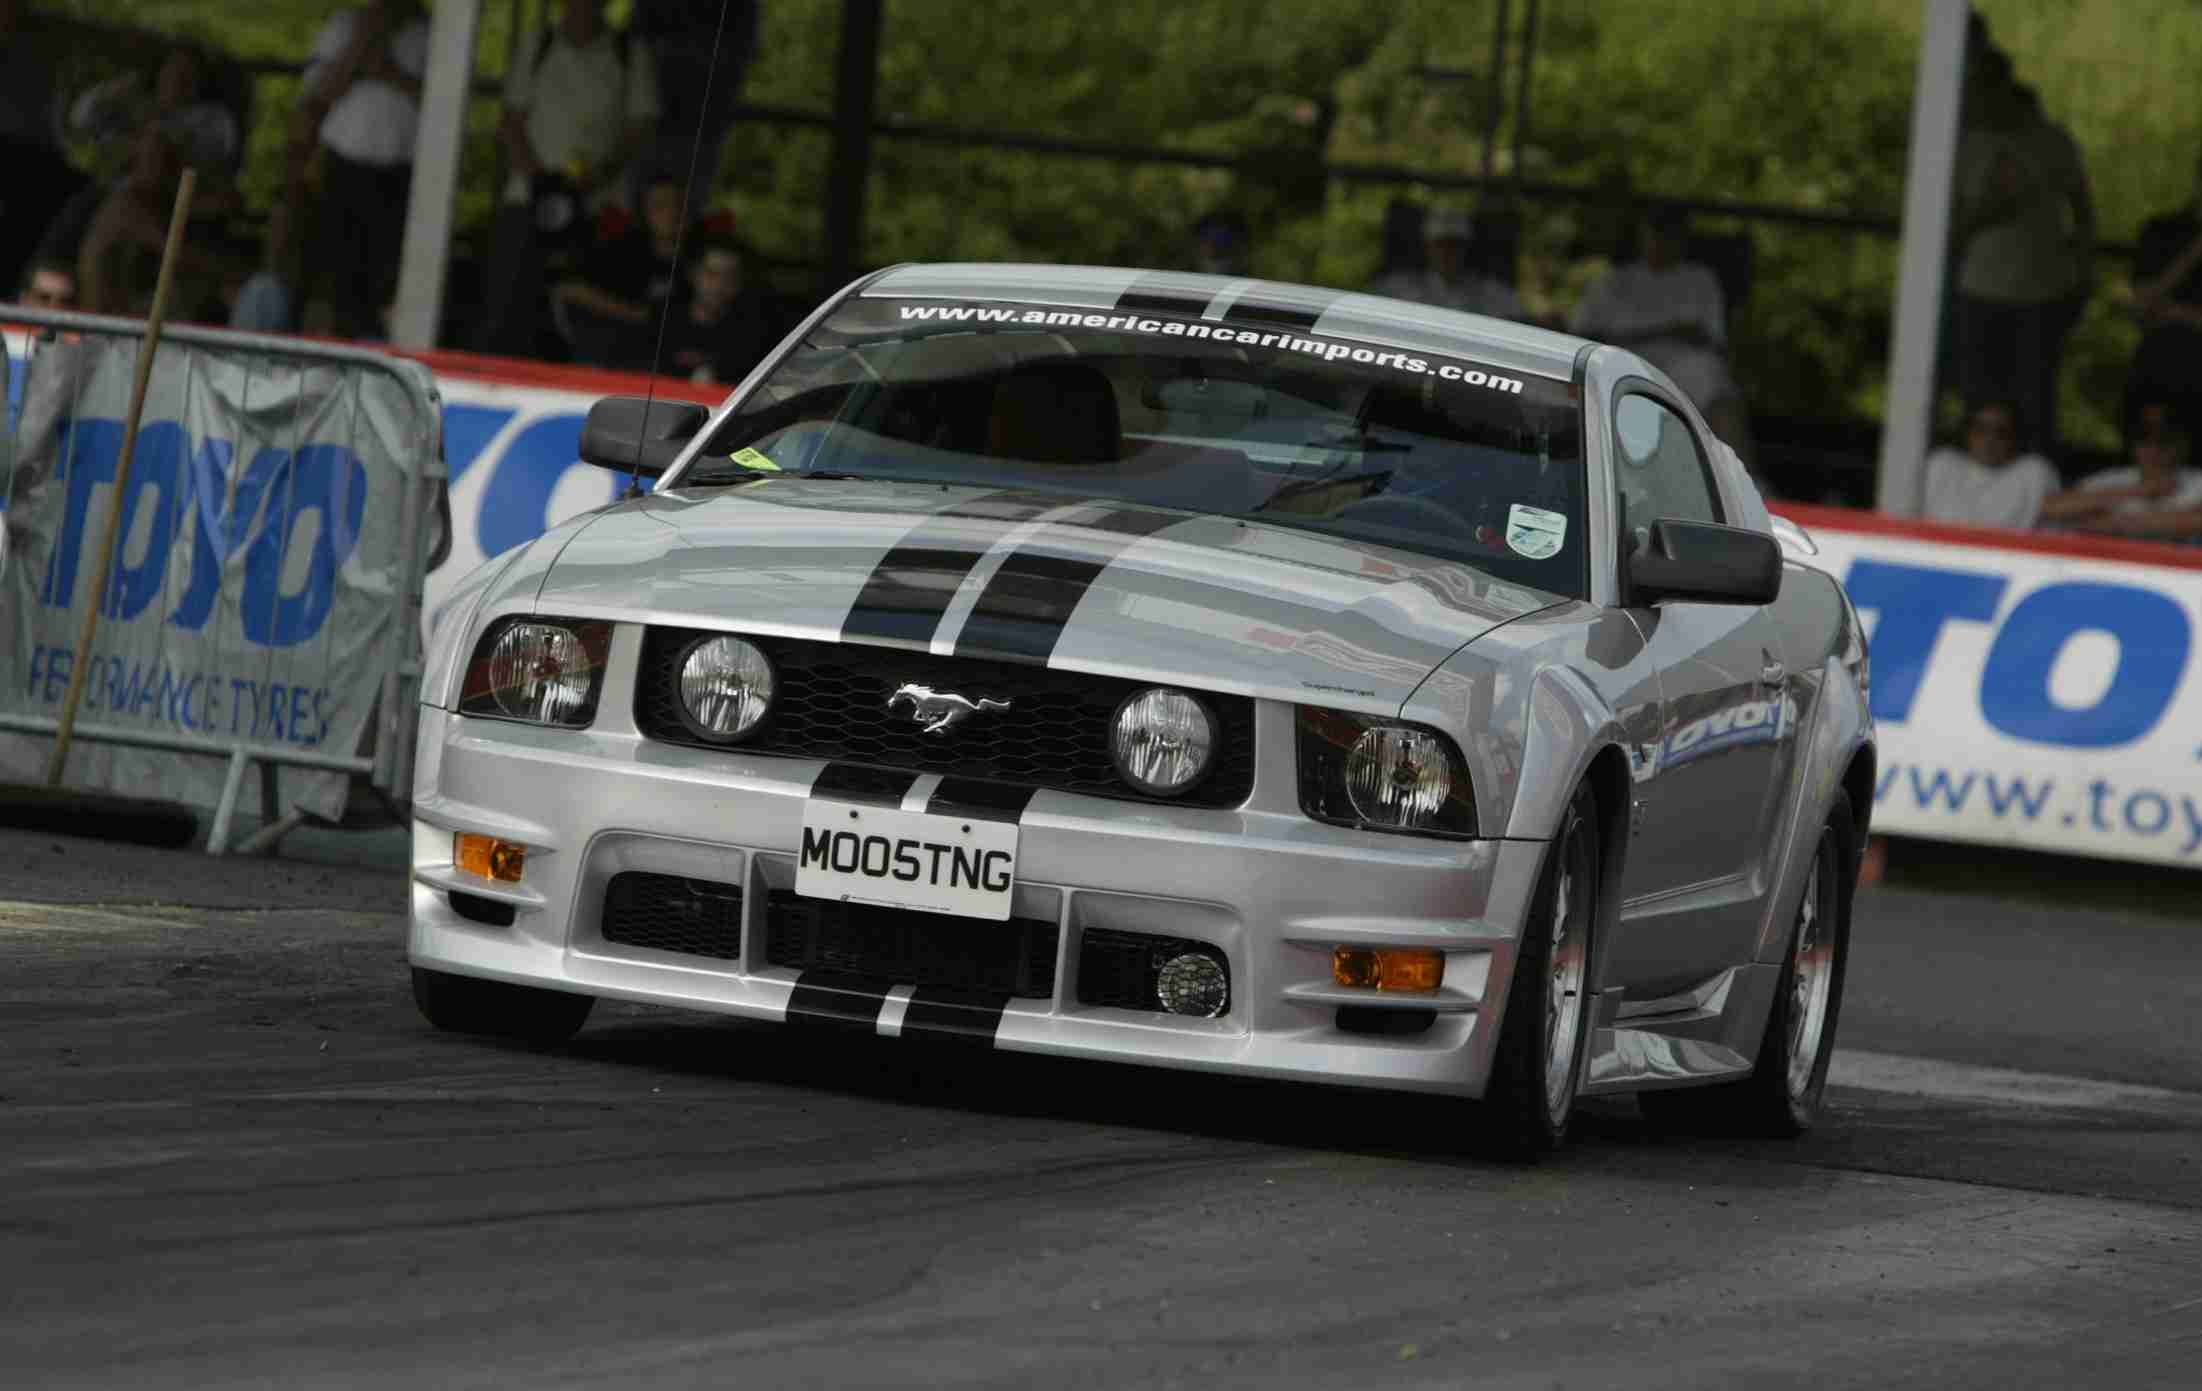 2005 Ford mustang 0-60 times #4